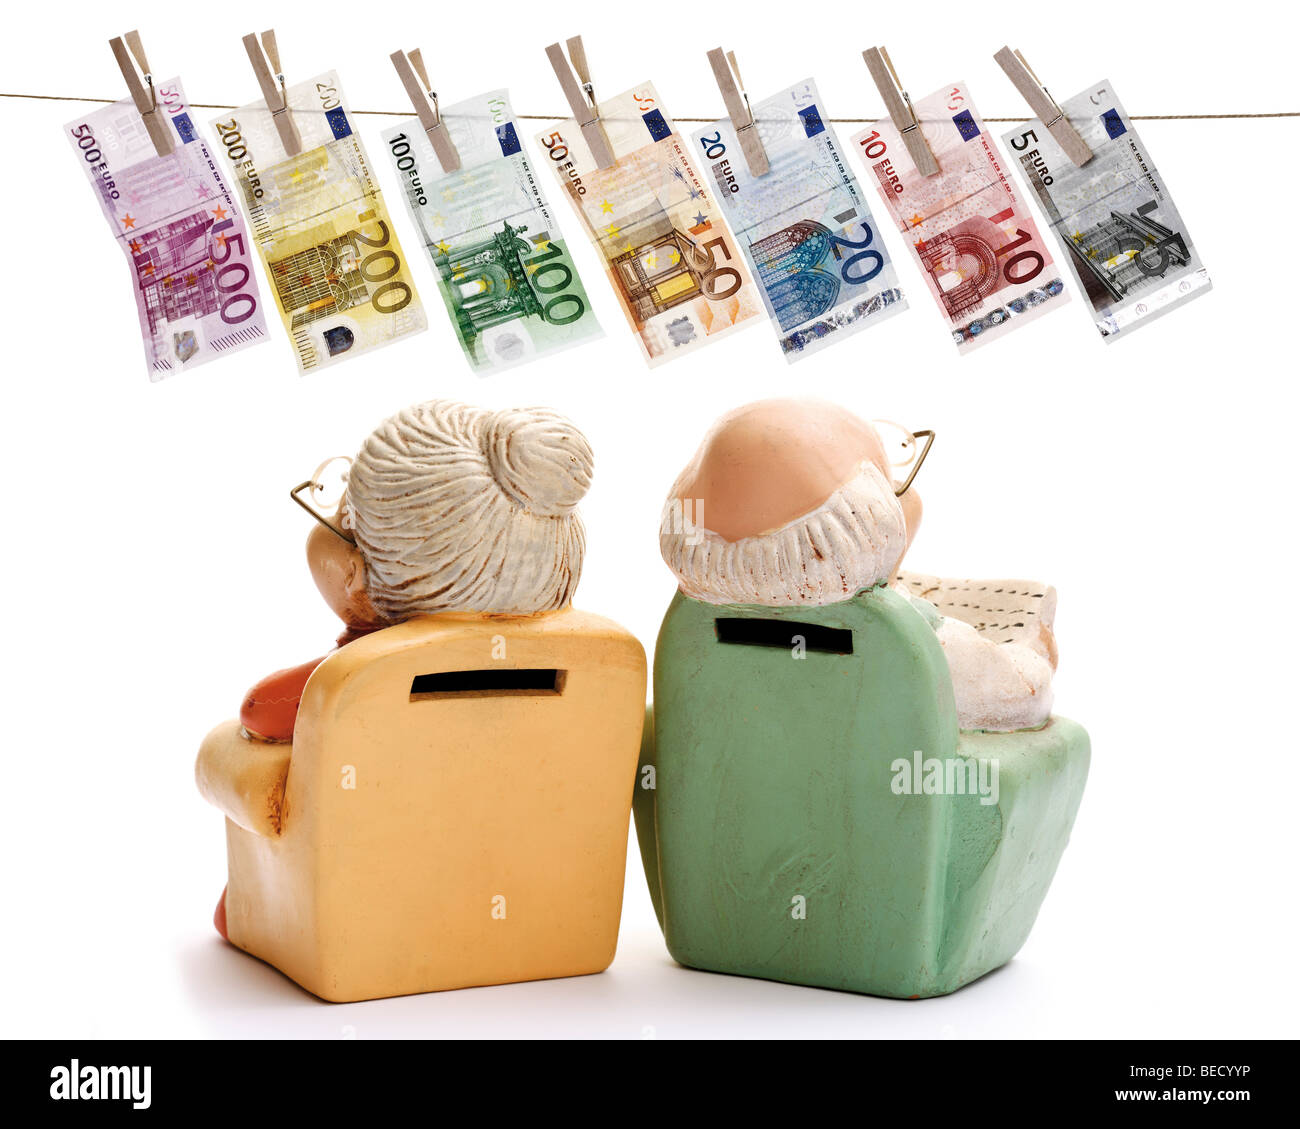 Miniature figures of pensioners, grandma and grandpa in an armchair, looking at euro banknotes hanging from a clothesline Stock Photo